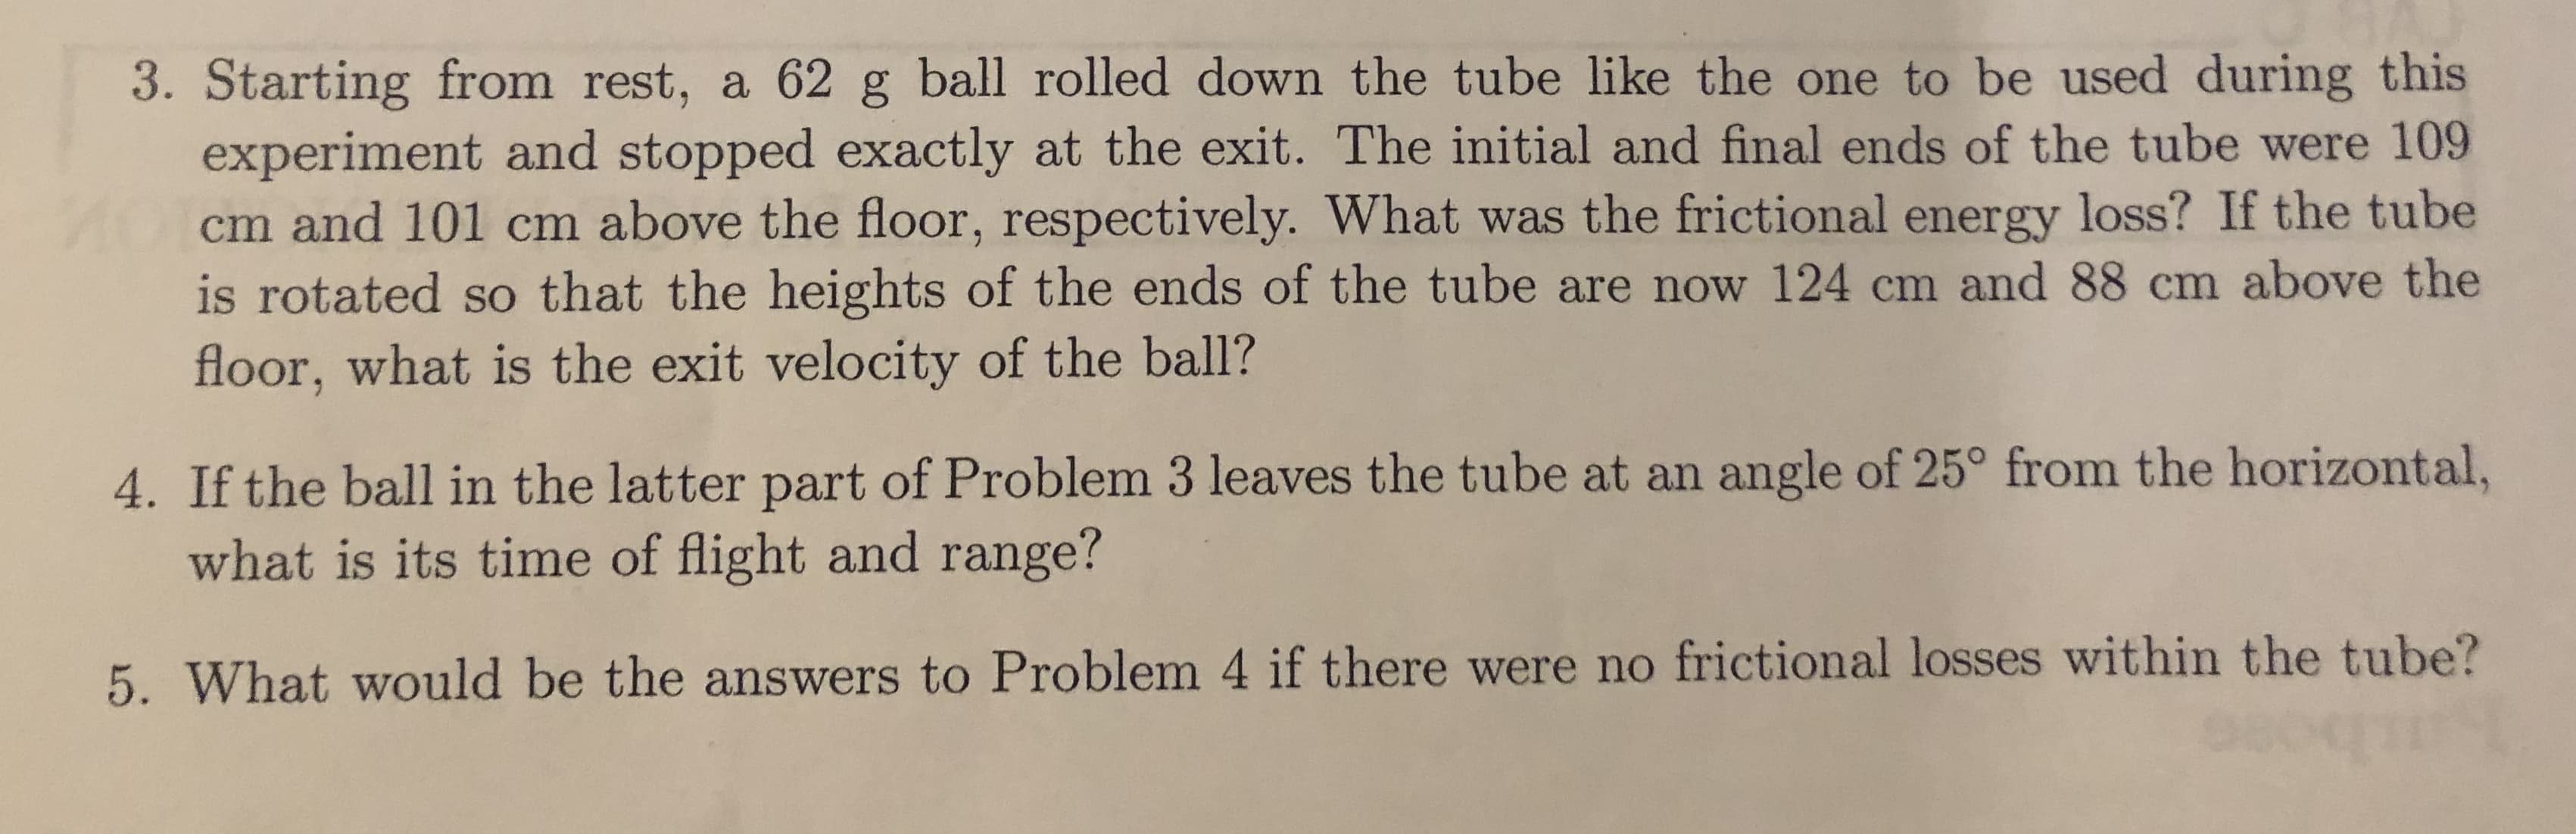 3. Starting from rest, a 62 g ball rolled down the tube like the one to be used during this
experiment and stopped exactly at the exit. The initial and final ends of the tube were 109
AOcm and 101 cm above the floor, respectively. What was the frictional energy loss? If the tube
is rotated so that the heights of the ends of the tube are now 124 cm and 88 cm above the
floor, what is the exit velocity of the ball?
4. If the ball in the latter part of Problem 3 leaves the tube at an angle of 25° from the horizontal,
what is its time of flight and range?
5. What would be the answers to Problem 4 if there were no frictional losses within the tube?
